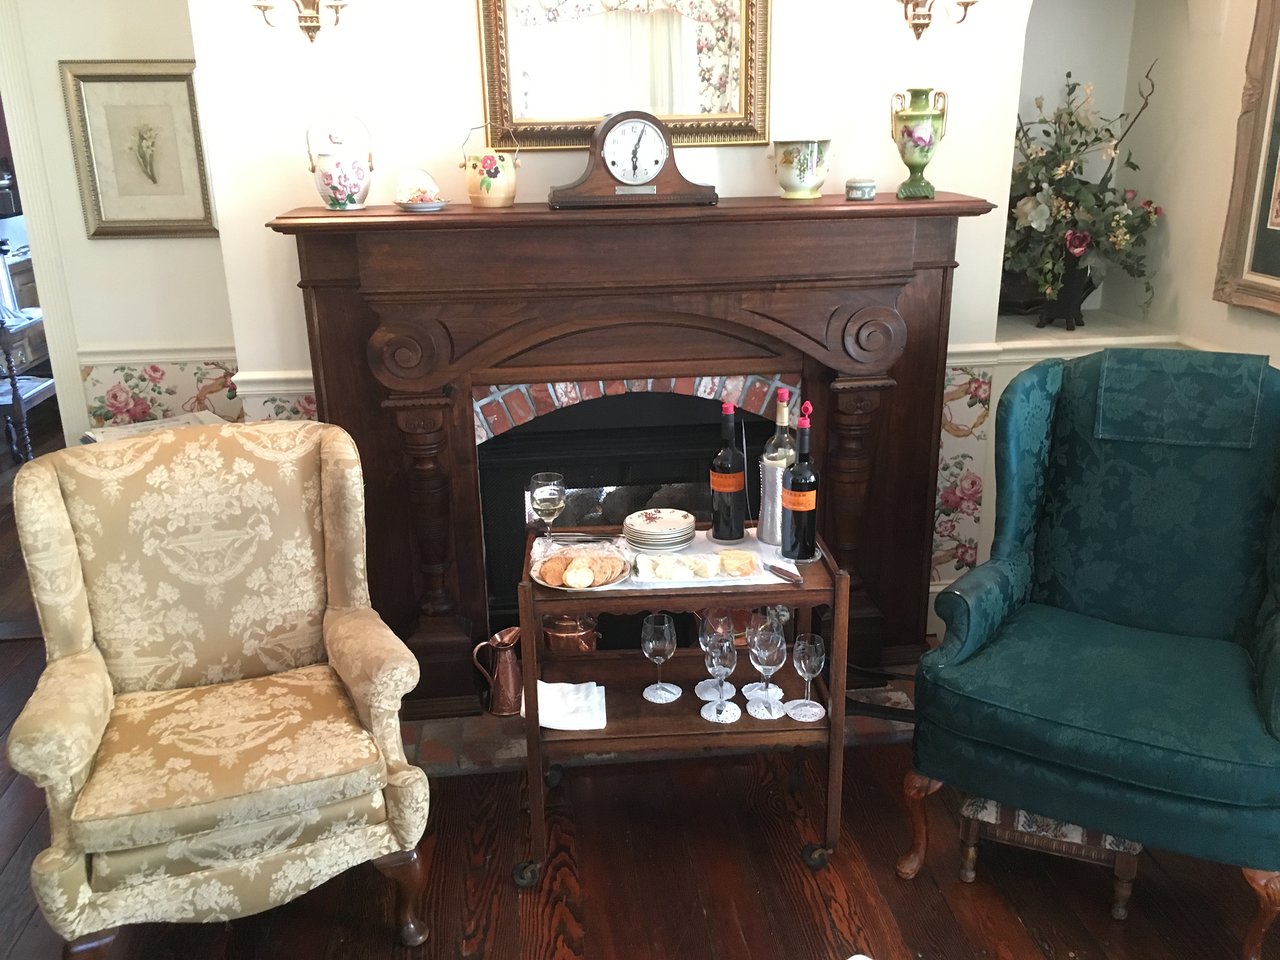 Burbank Fireplace Fresh Grey Gables Inn Updated 2019 Prices B&b Reviews and